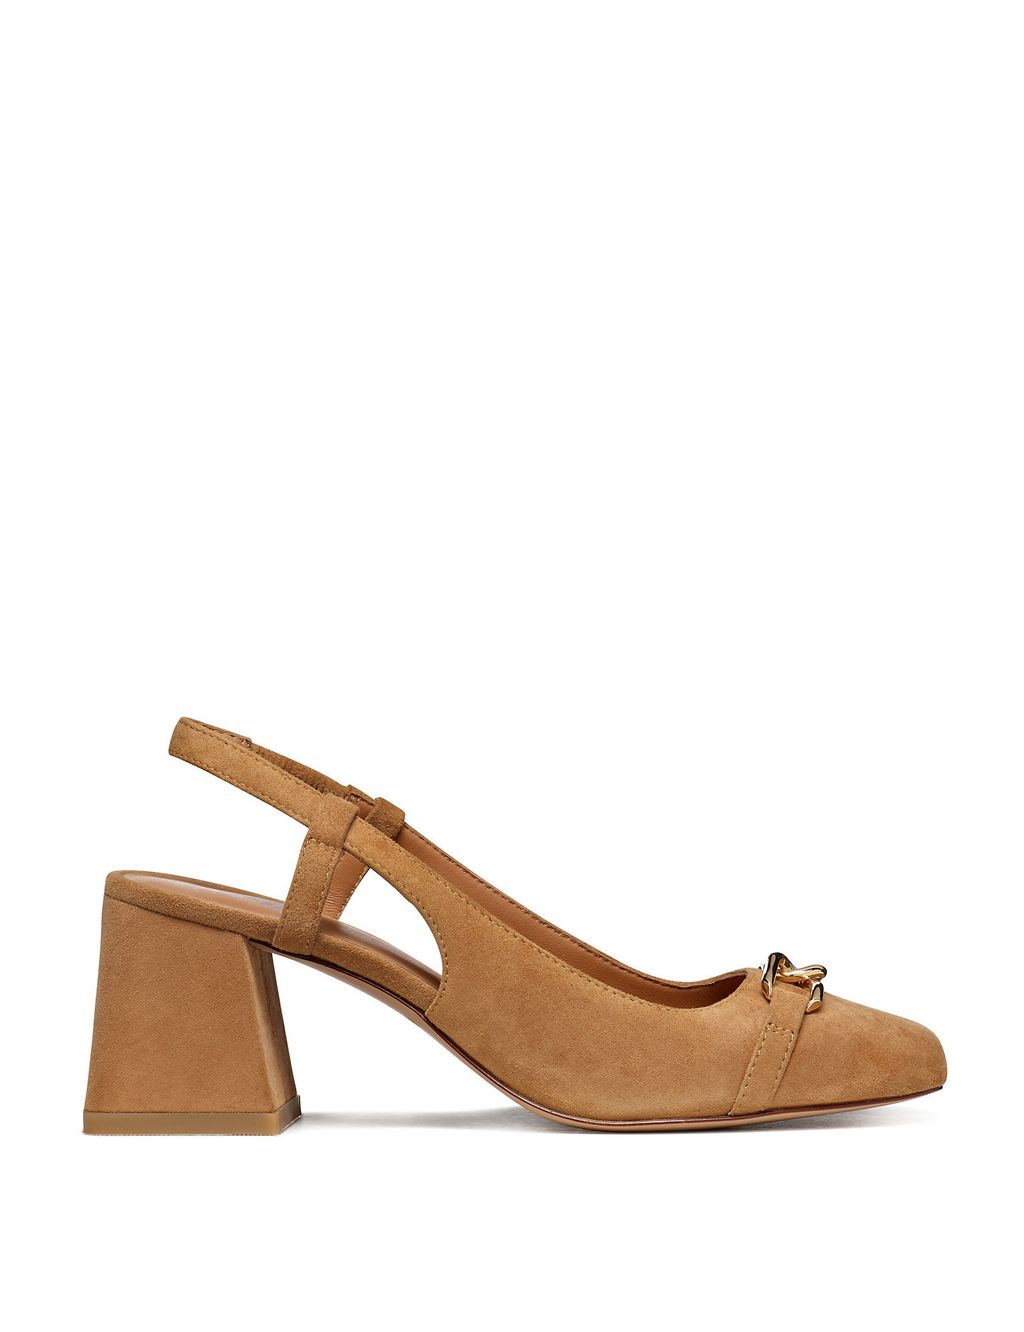 Suede Block Heel Square Toe Slingback Shoes 3 of 6